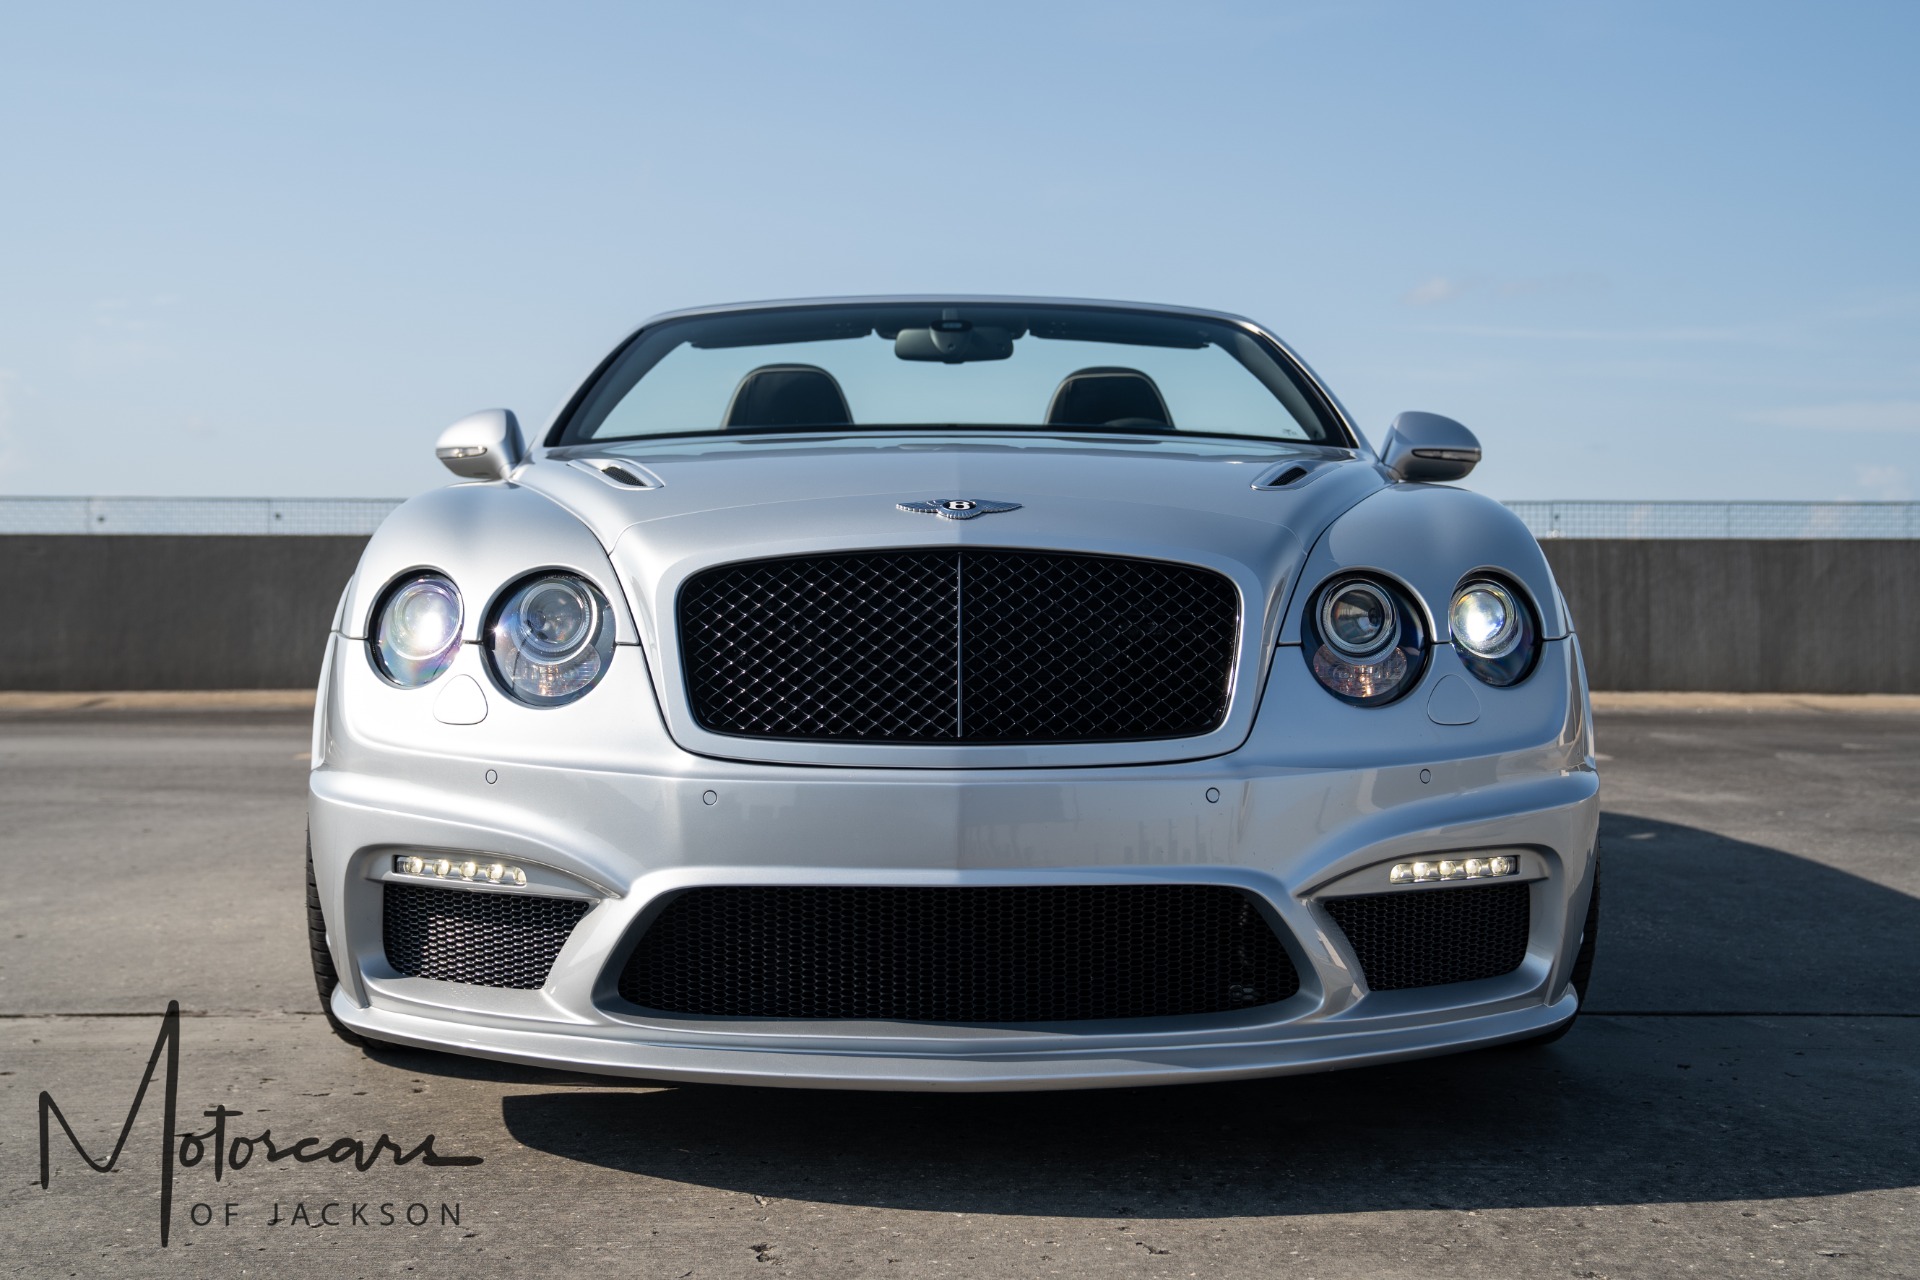 Used-2011-Bentley-Continental-GTC-Supersports-for-sale-Jackson-MS